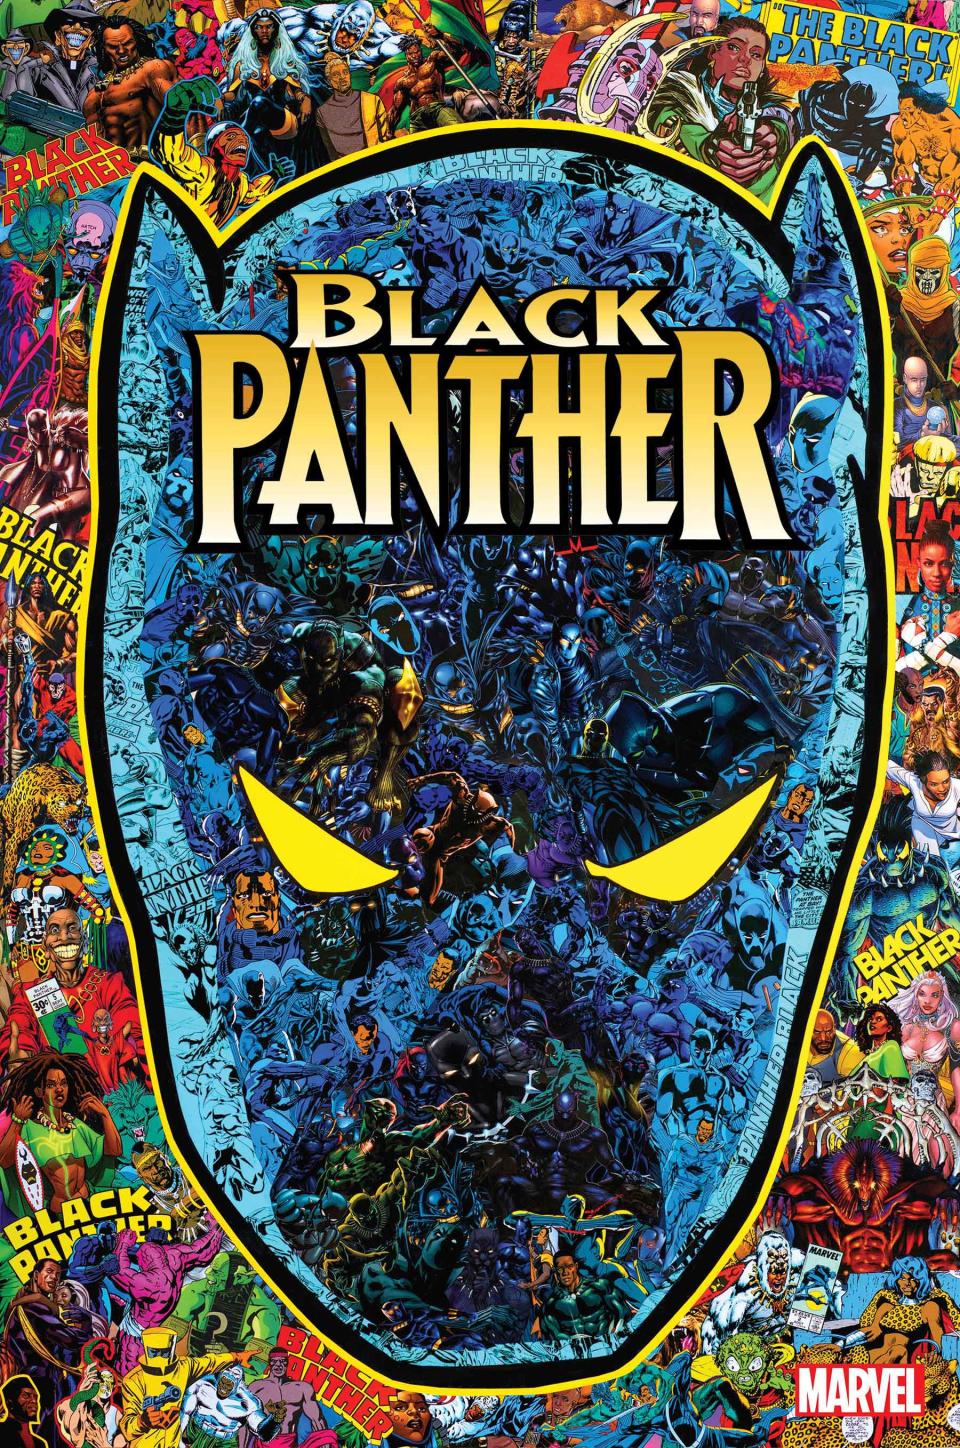 Black Panther's mask made up of lots of characters fighting